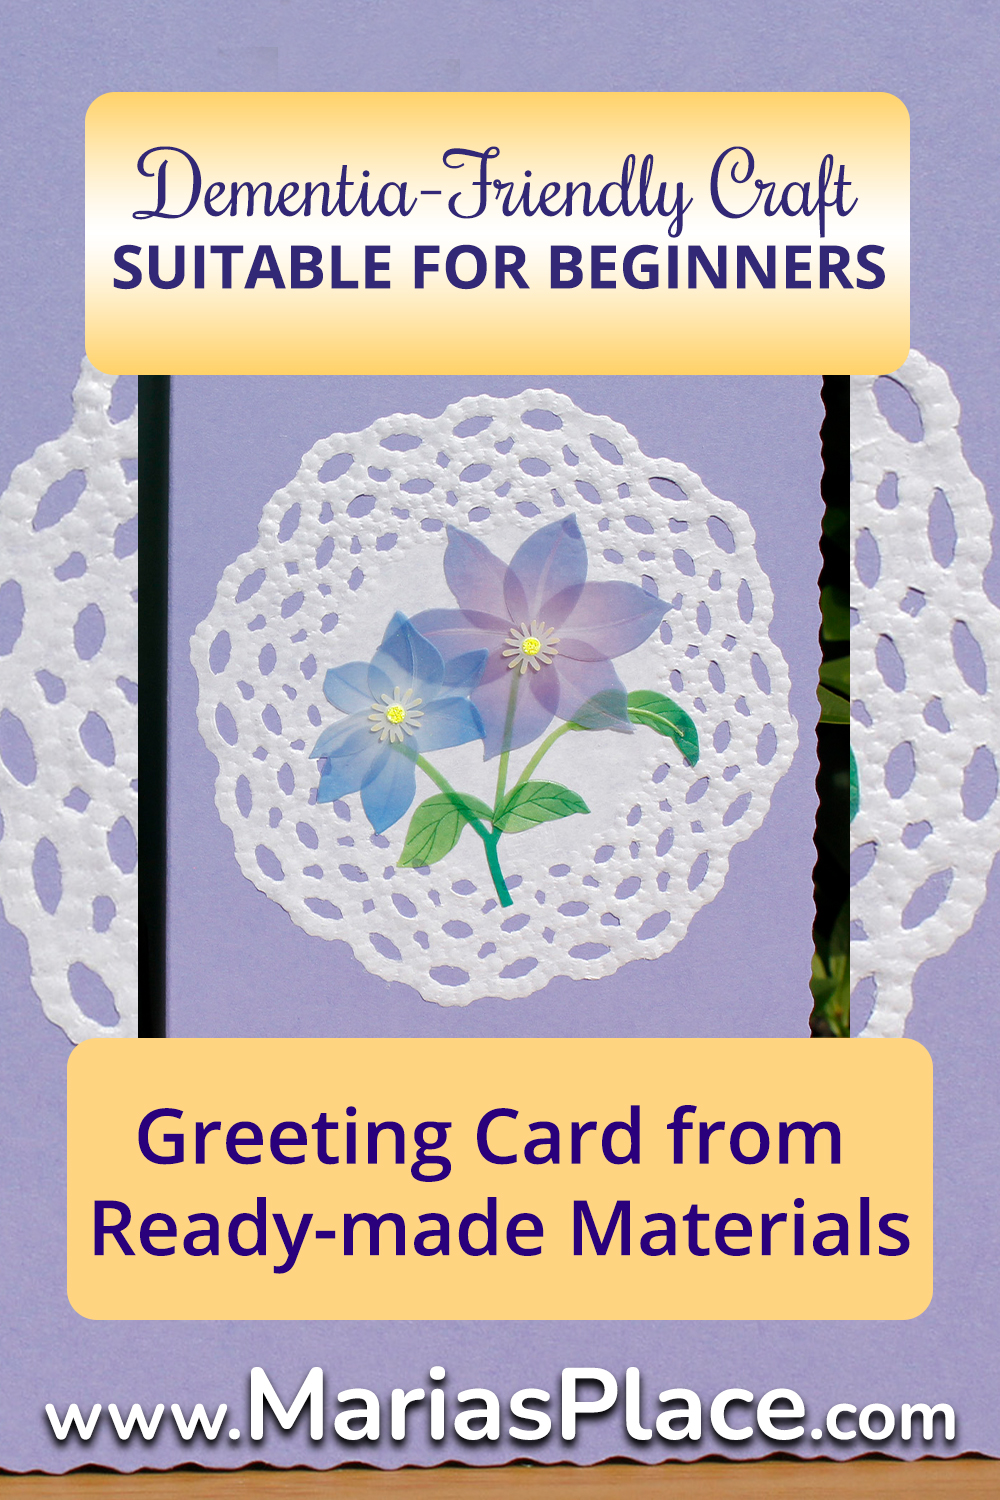 Greeting Card from Ready-made Materials